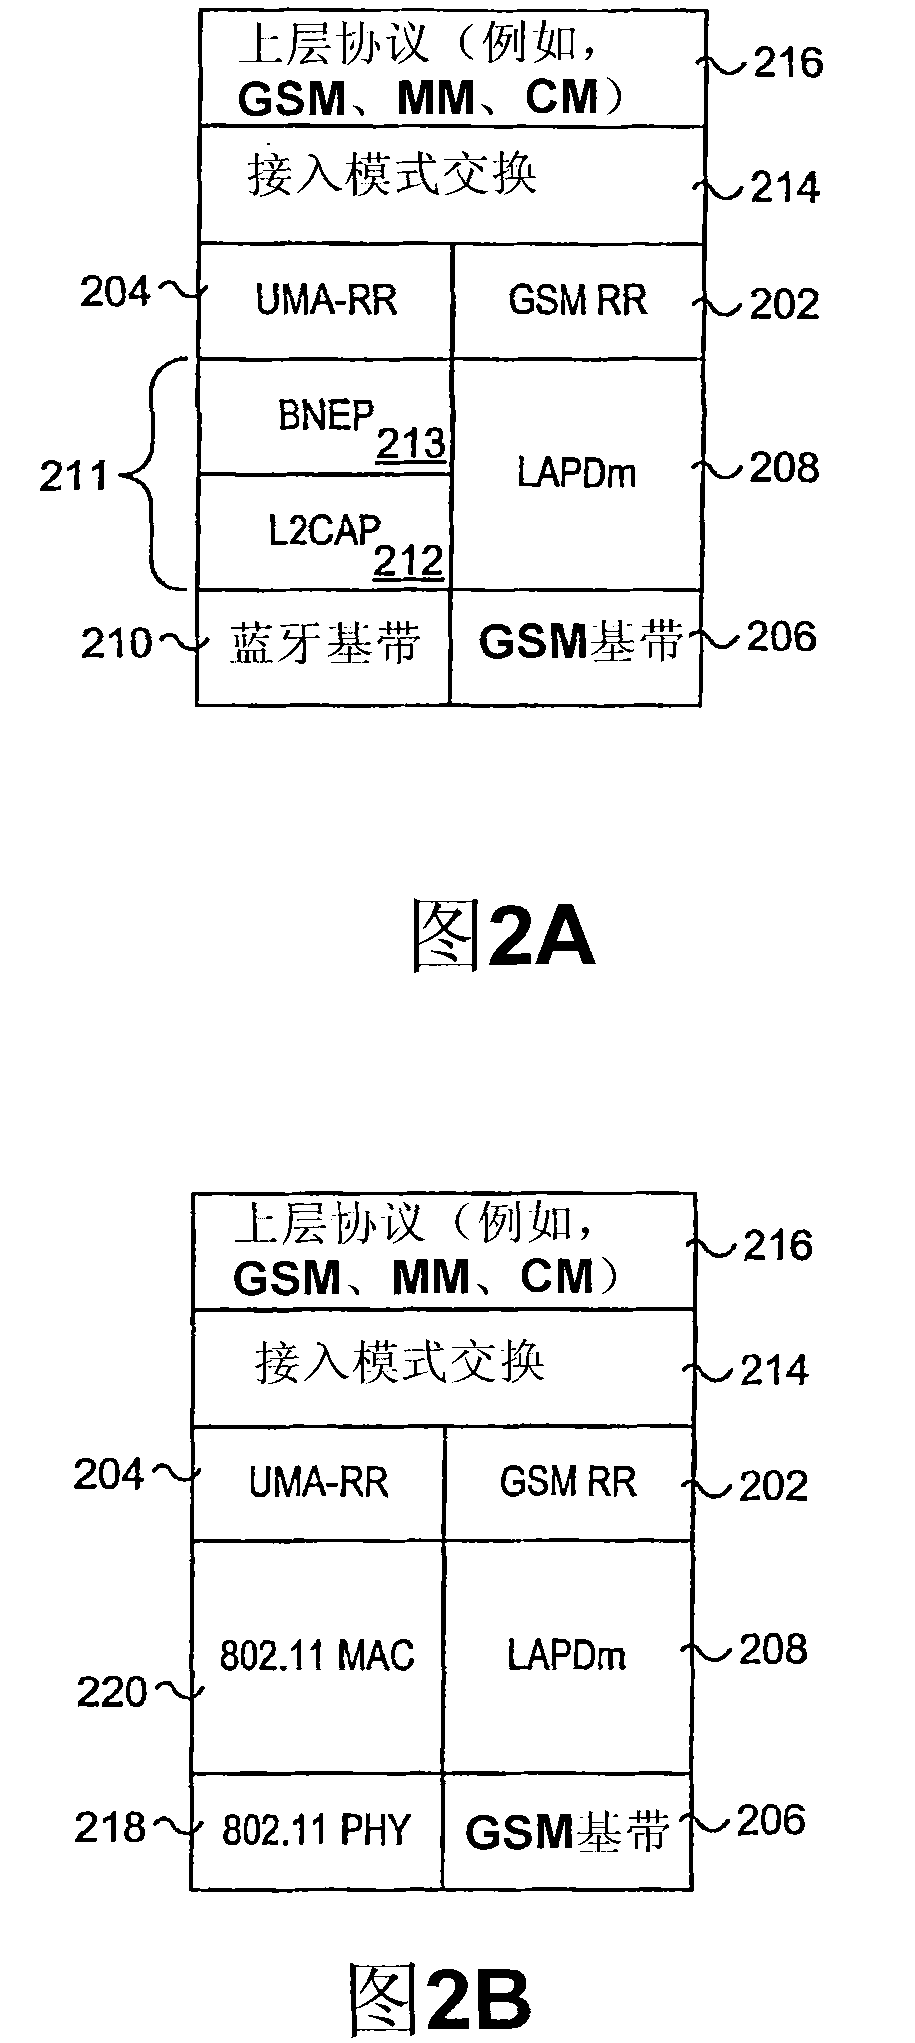 Messaging between an mobile station and network controller